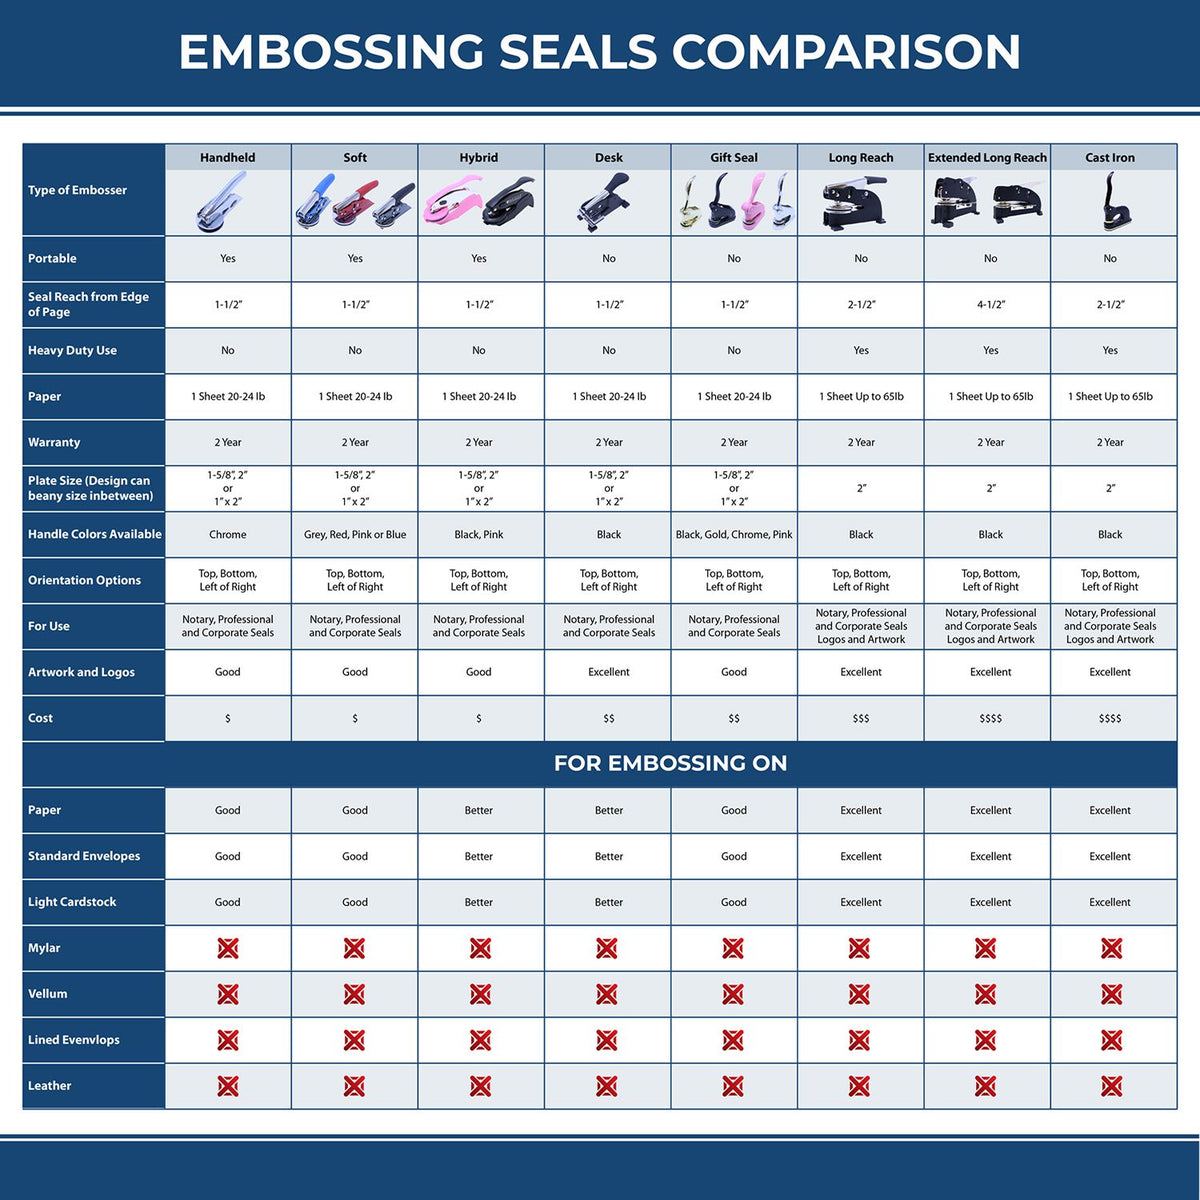 A comparison chart for the different types of mount models available for the Soft Minnesota Professional Engineer Seal.